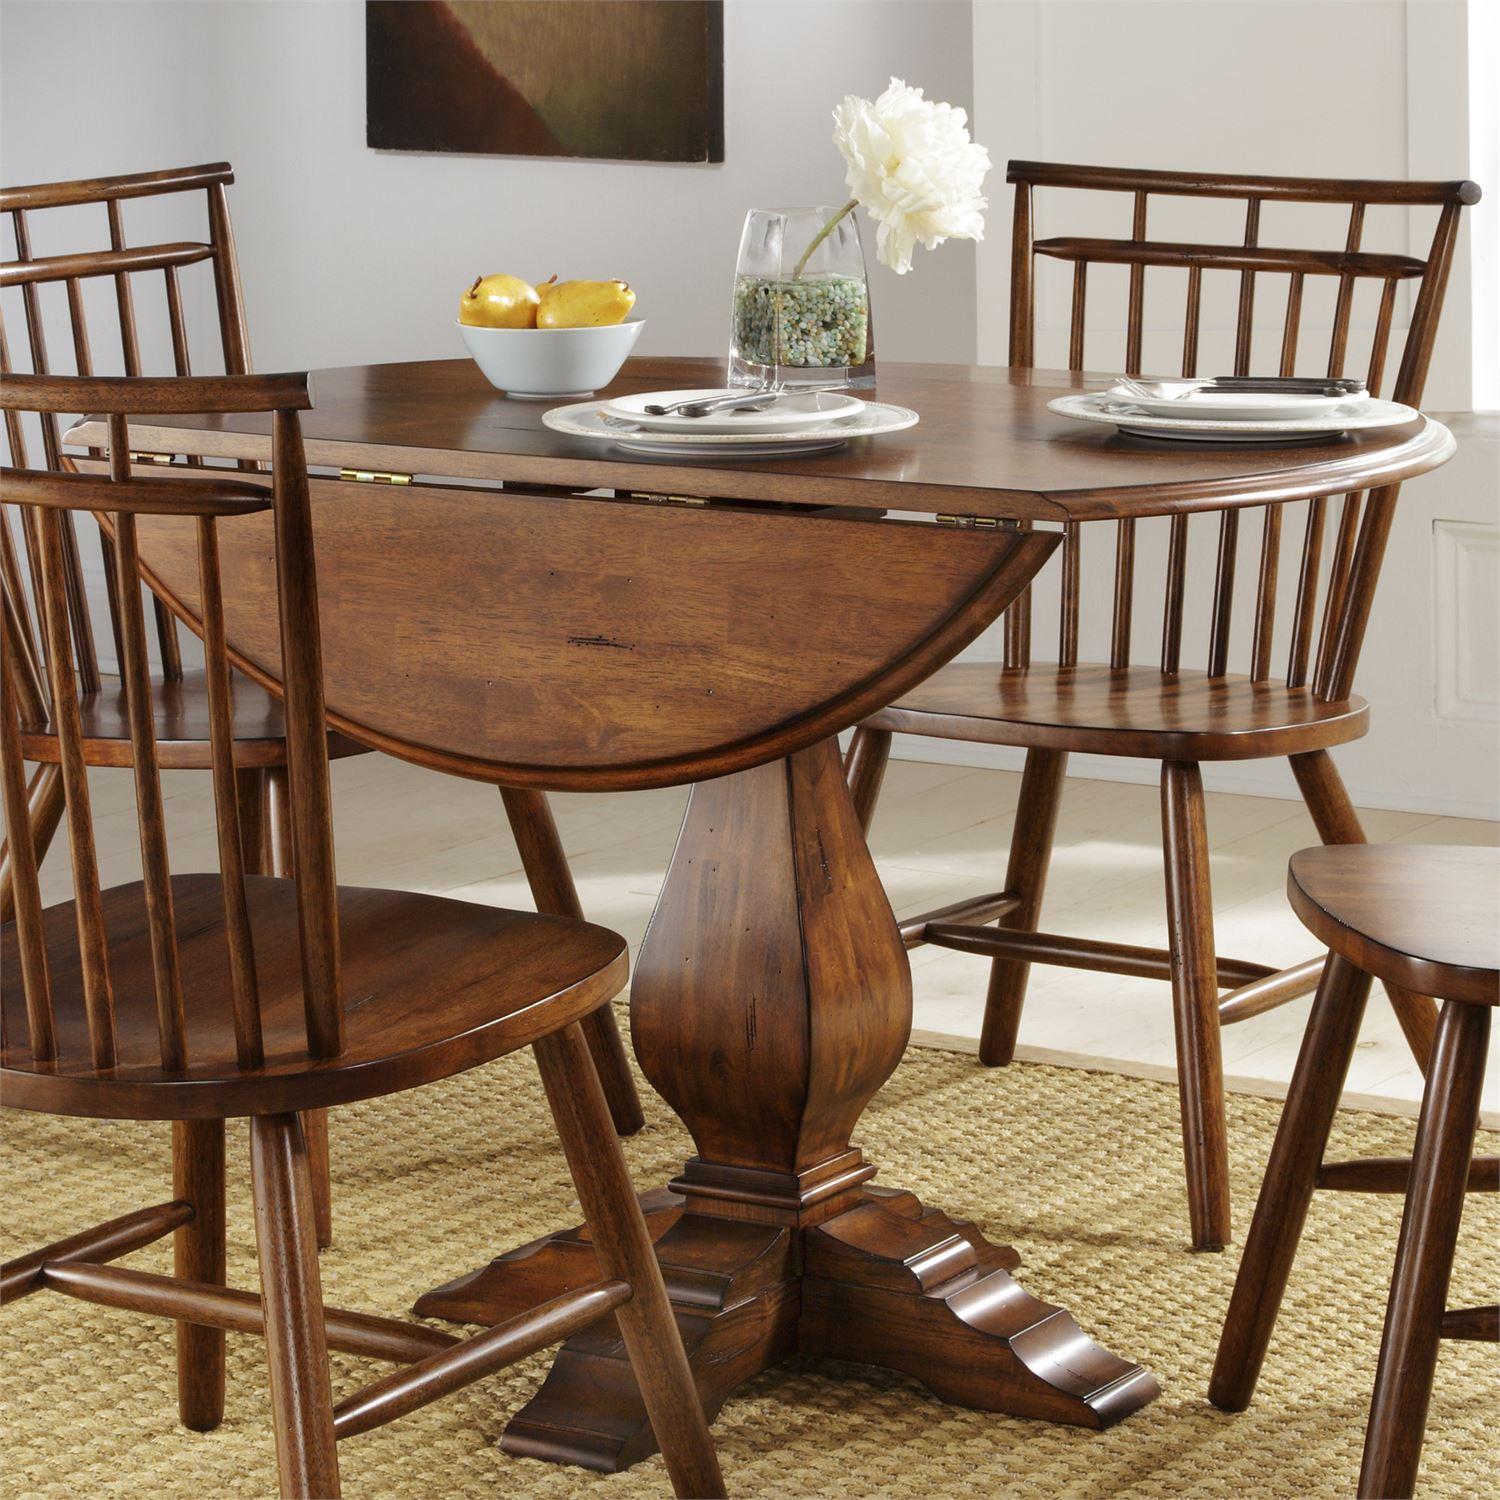 Creations Round Drop Leaf Table image